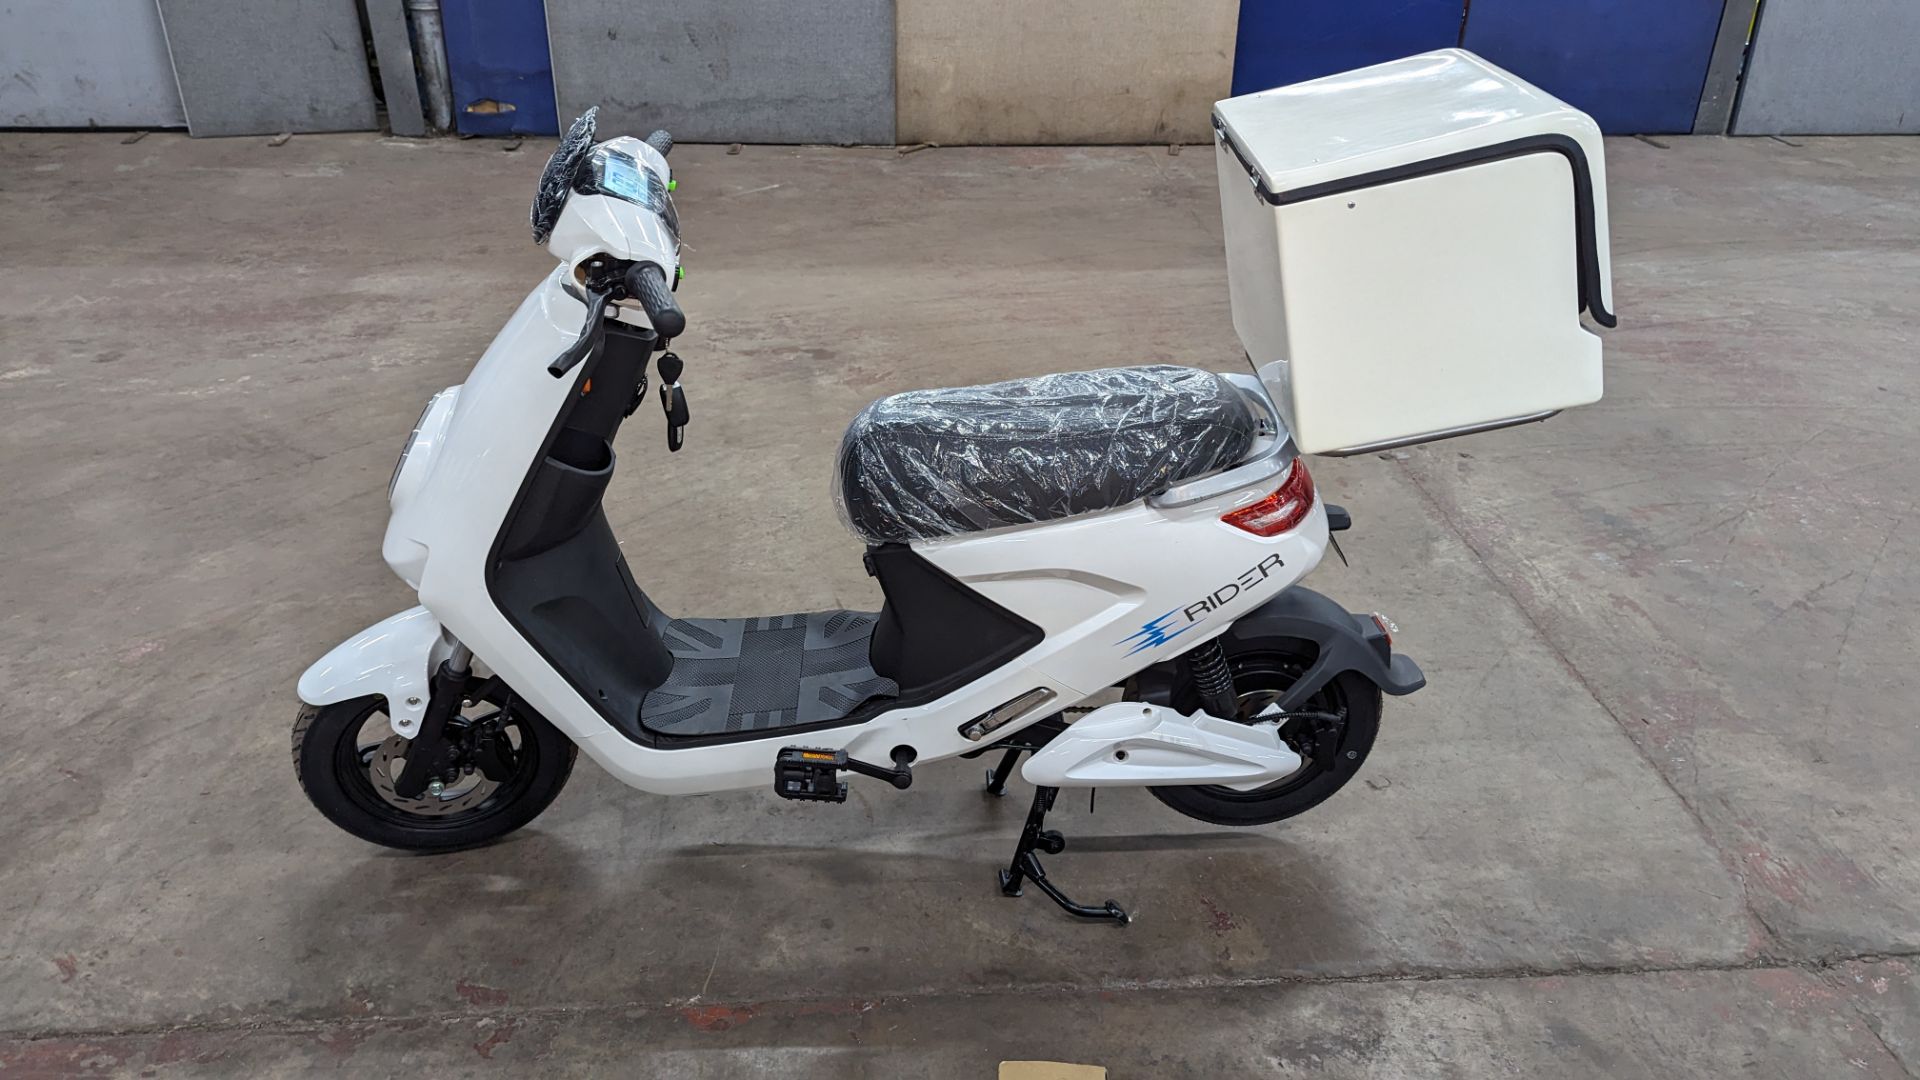 Model 18 Electric Bike: Zero (0) recorded miles, white body with black detailing, insulated box moun - Image 10 of 16